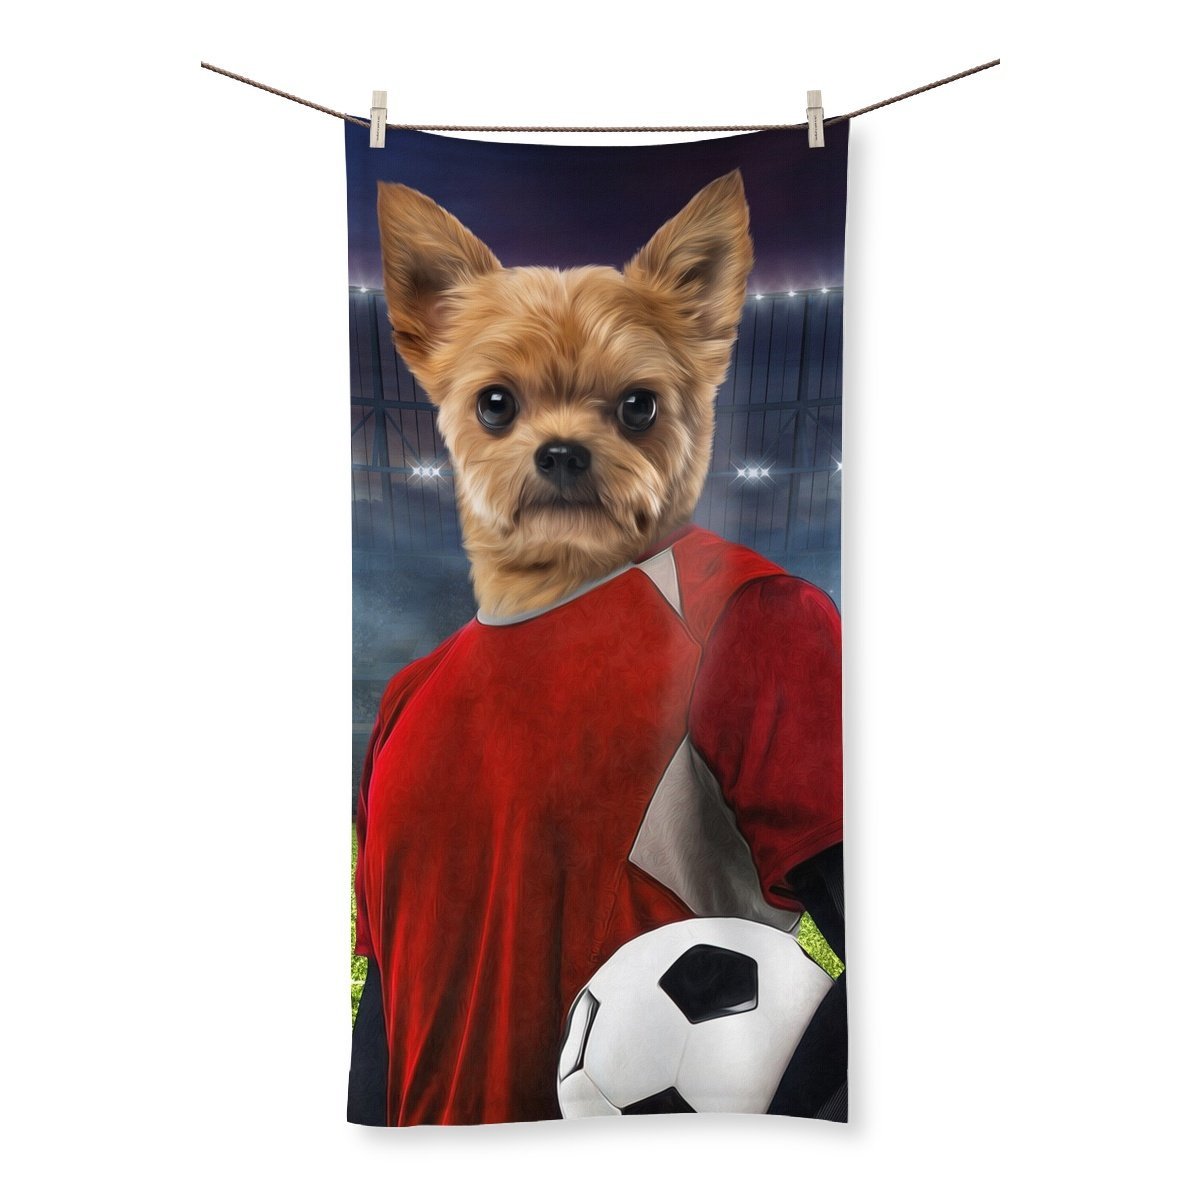 The Football Player: Custom Pet Towel - Paw & Glory - #pet portraits# - #dog portraits# - #pet portraits uk#Paw & Glory, pawandglory, in home pet photography, paintings of pets from photos, in home pet photography, pictures for pets, hogwarts dog houses, cat picture painting, pet portrait,custom pet portrait Towel